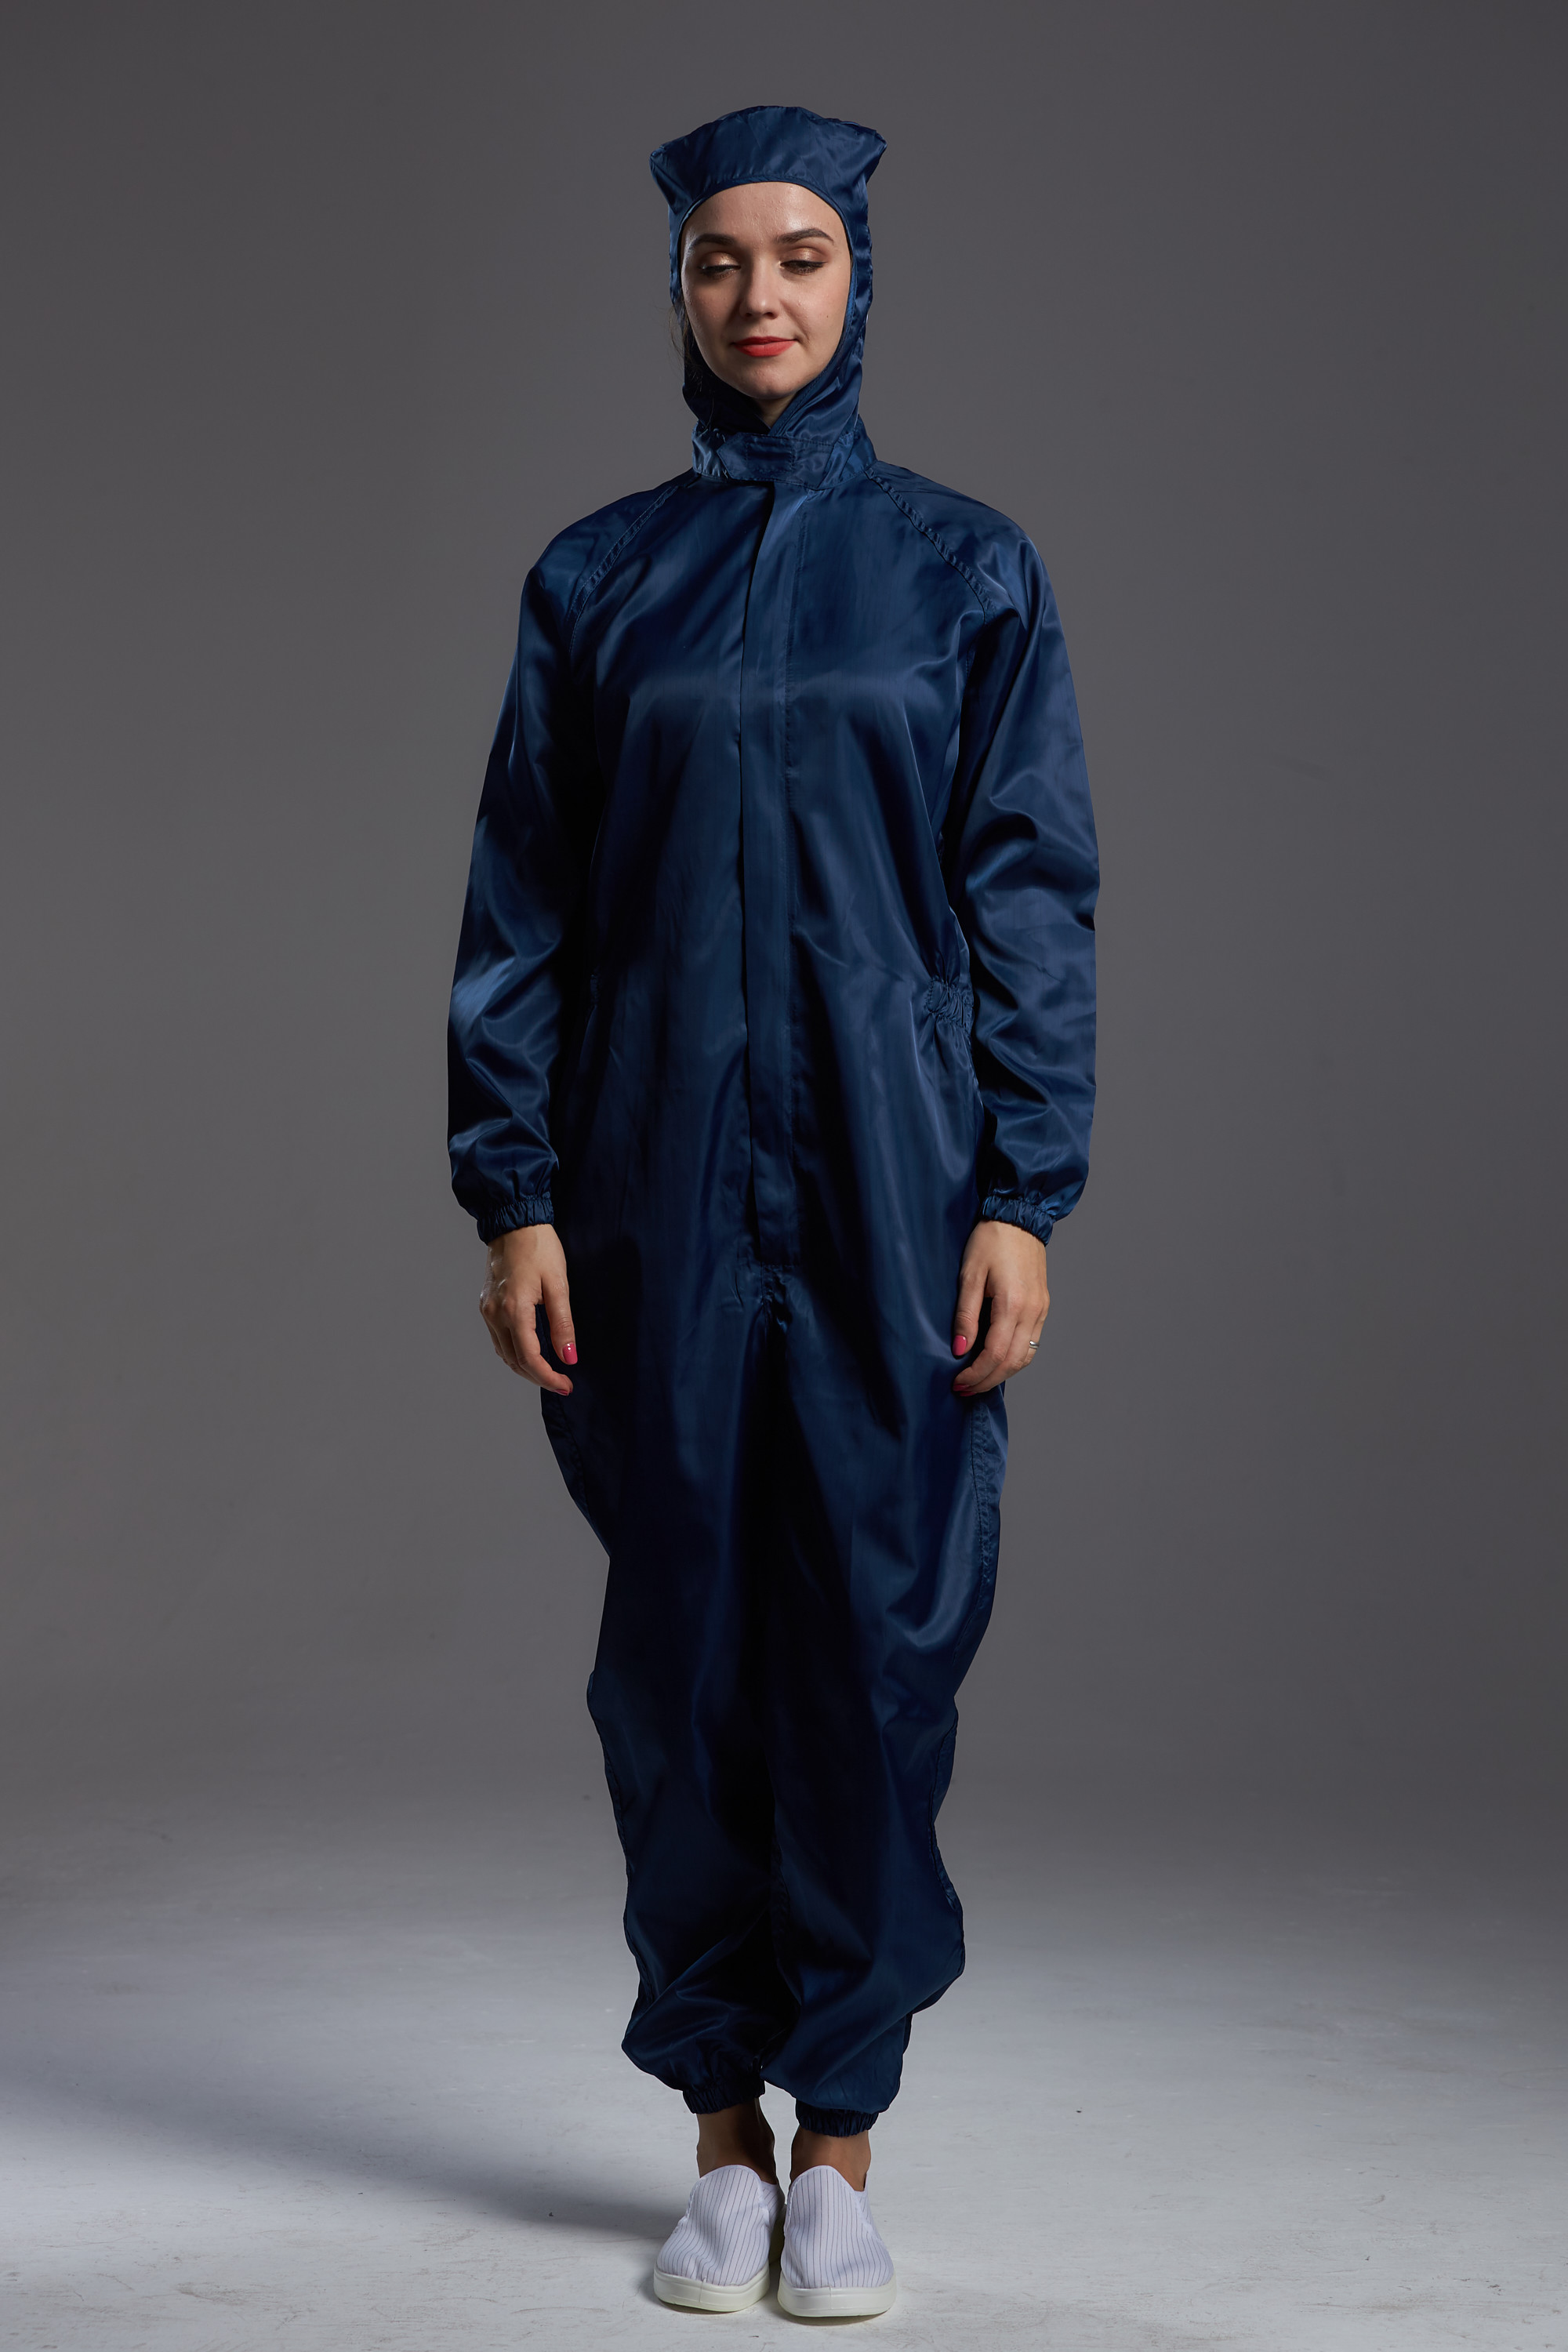 Best Dustfree ESD Anti Static Garments Jumpsuit Hooded Suit For Medical Work Shop wholesale